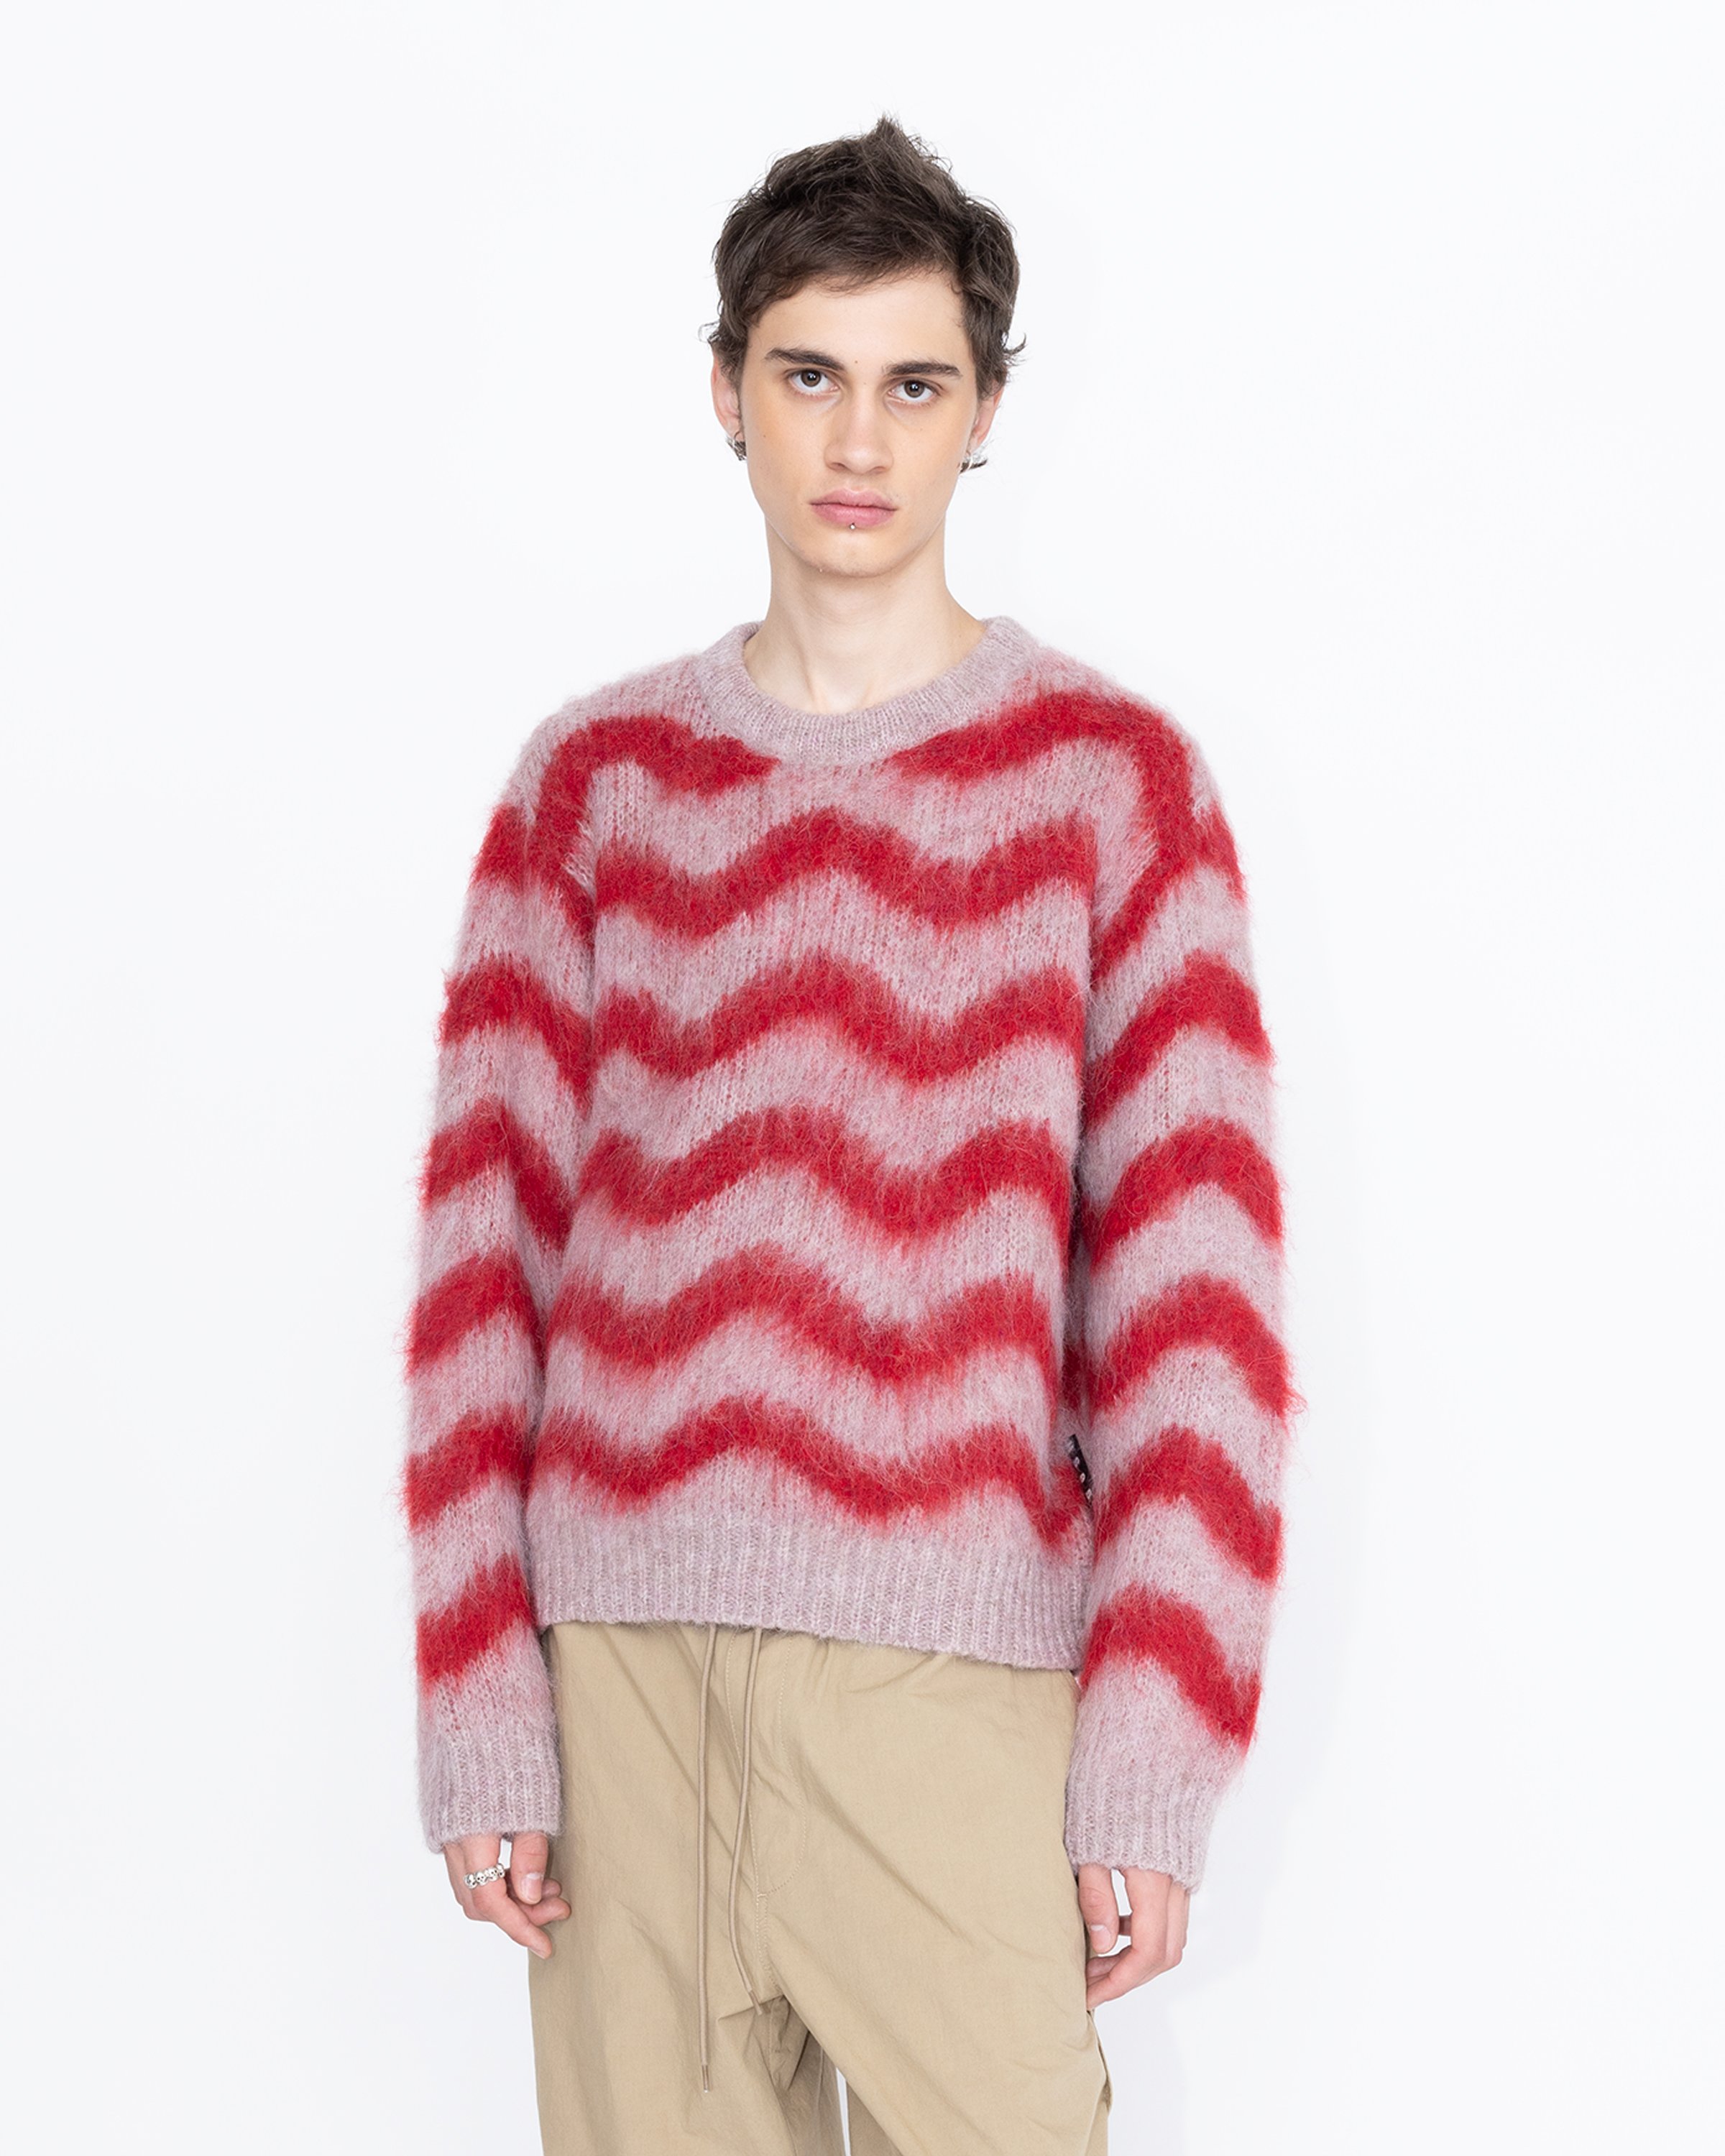 Highsnobiety HS05 - Alpaca Fuzzy Wave Sweater Pale Rose/Red - Clothing - Multi - Image 3